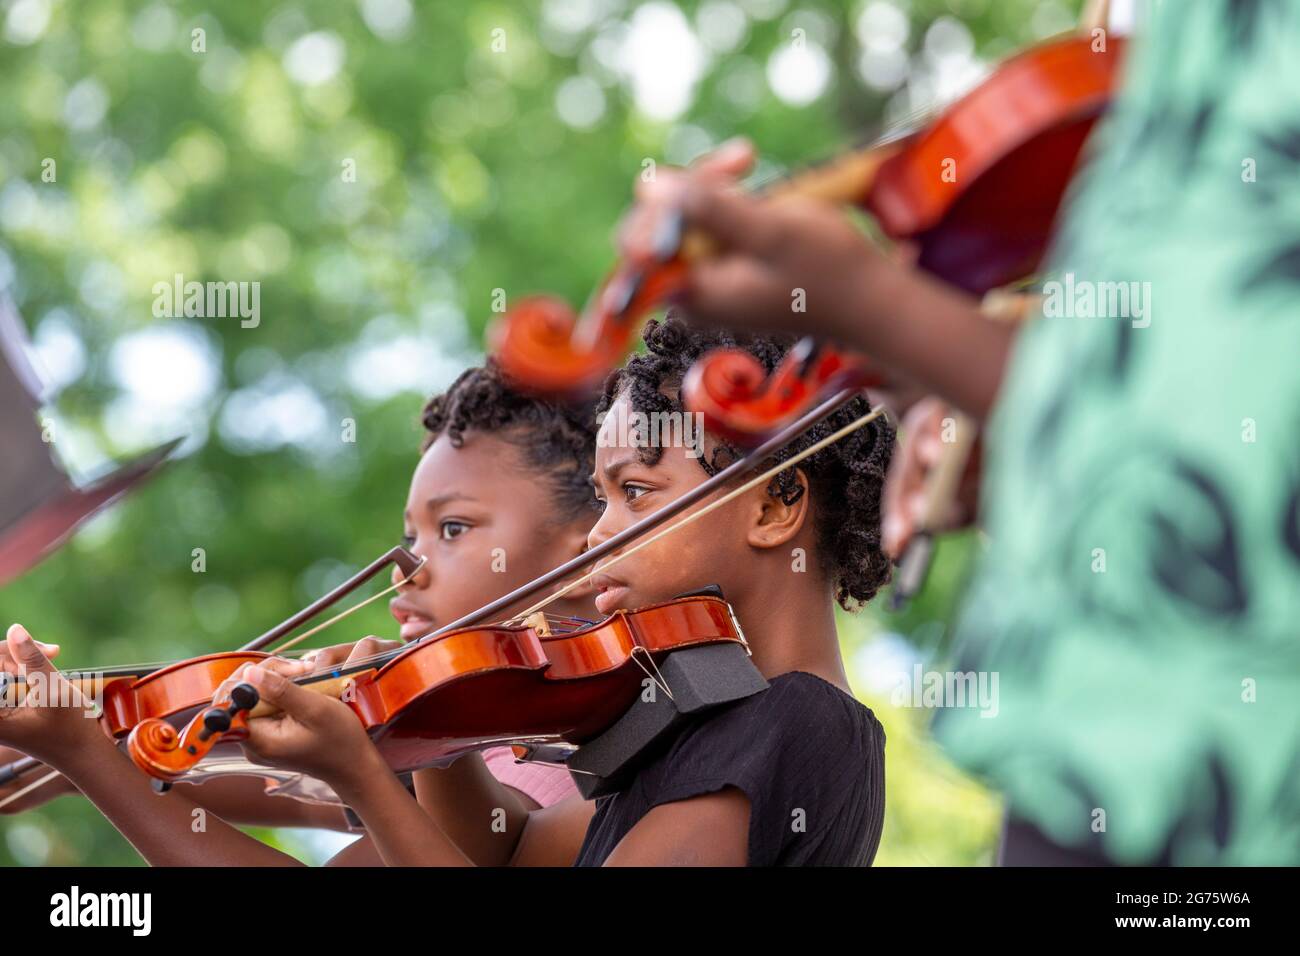 Detroit, Michigan - Students at Duke Ellington elementary school, part of the Detroit Public School system, play violin at a community arts and music Stock Photo